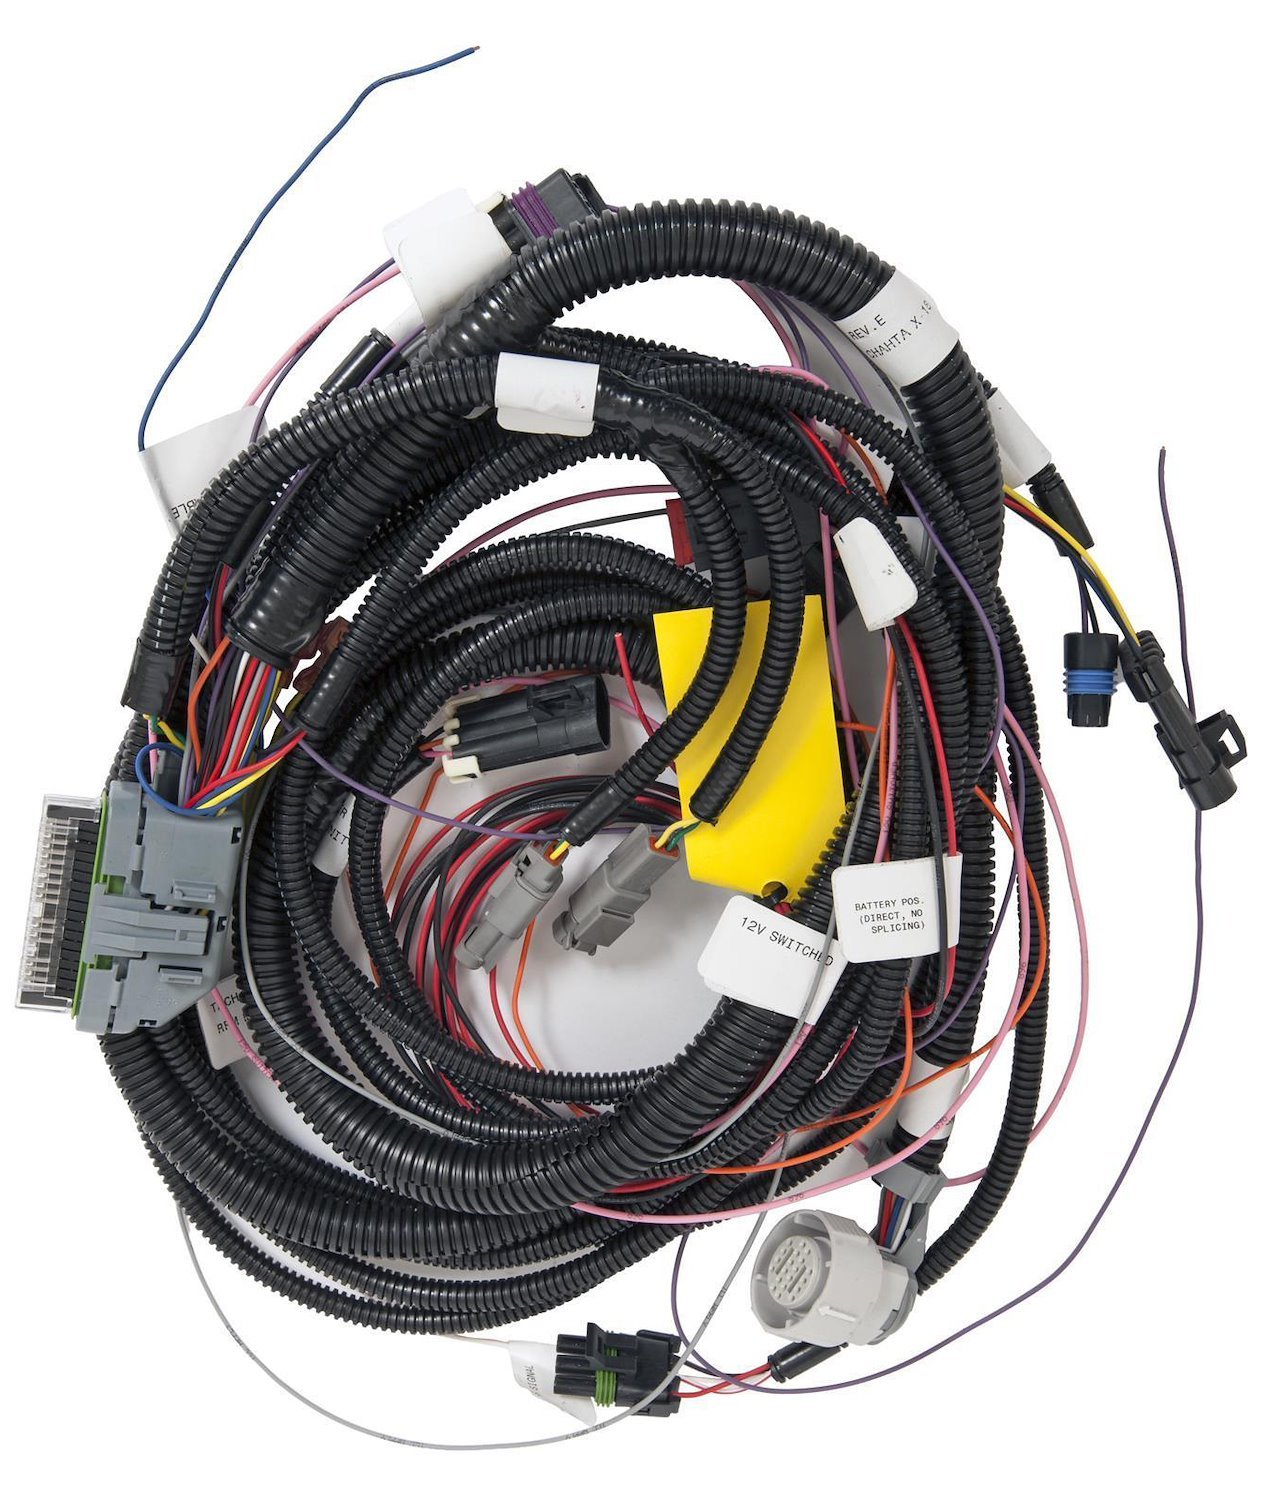 EZ-TCU Main Harness Only For Use With 890-302820